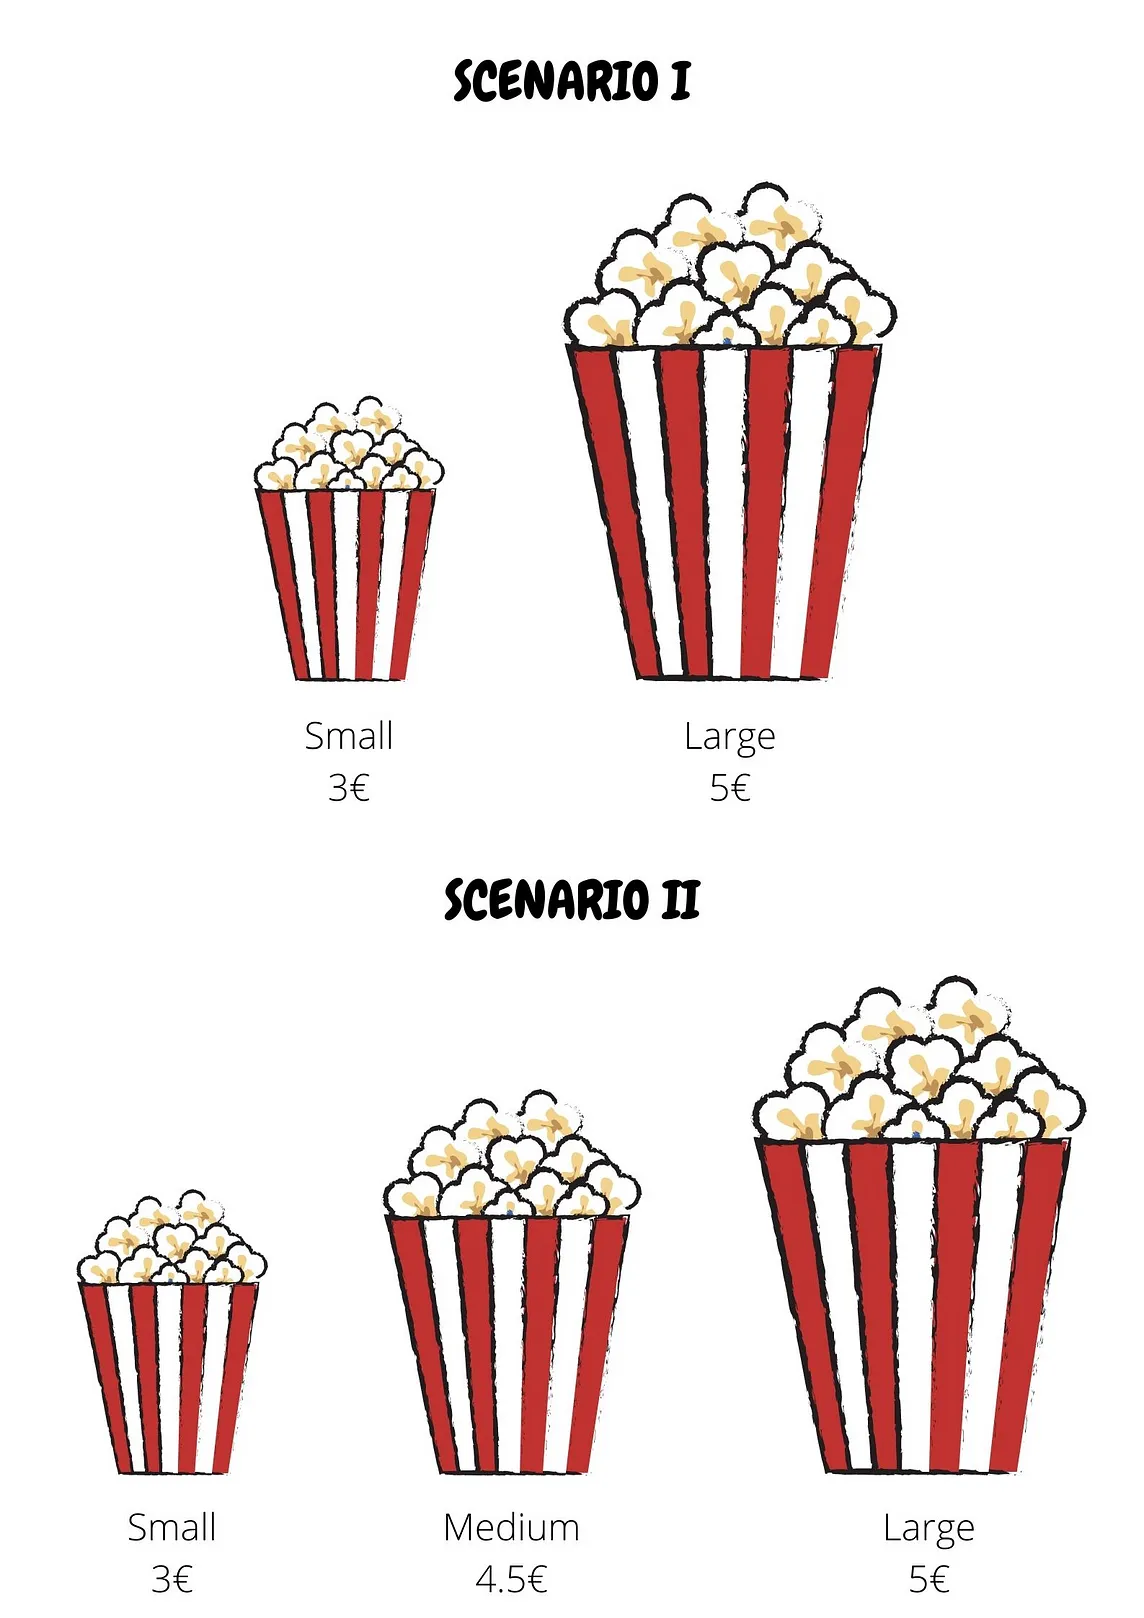 The Decoy Effect: How does the option of the medium popcorn tempt you into buying the large one?